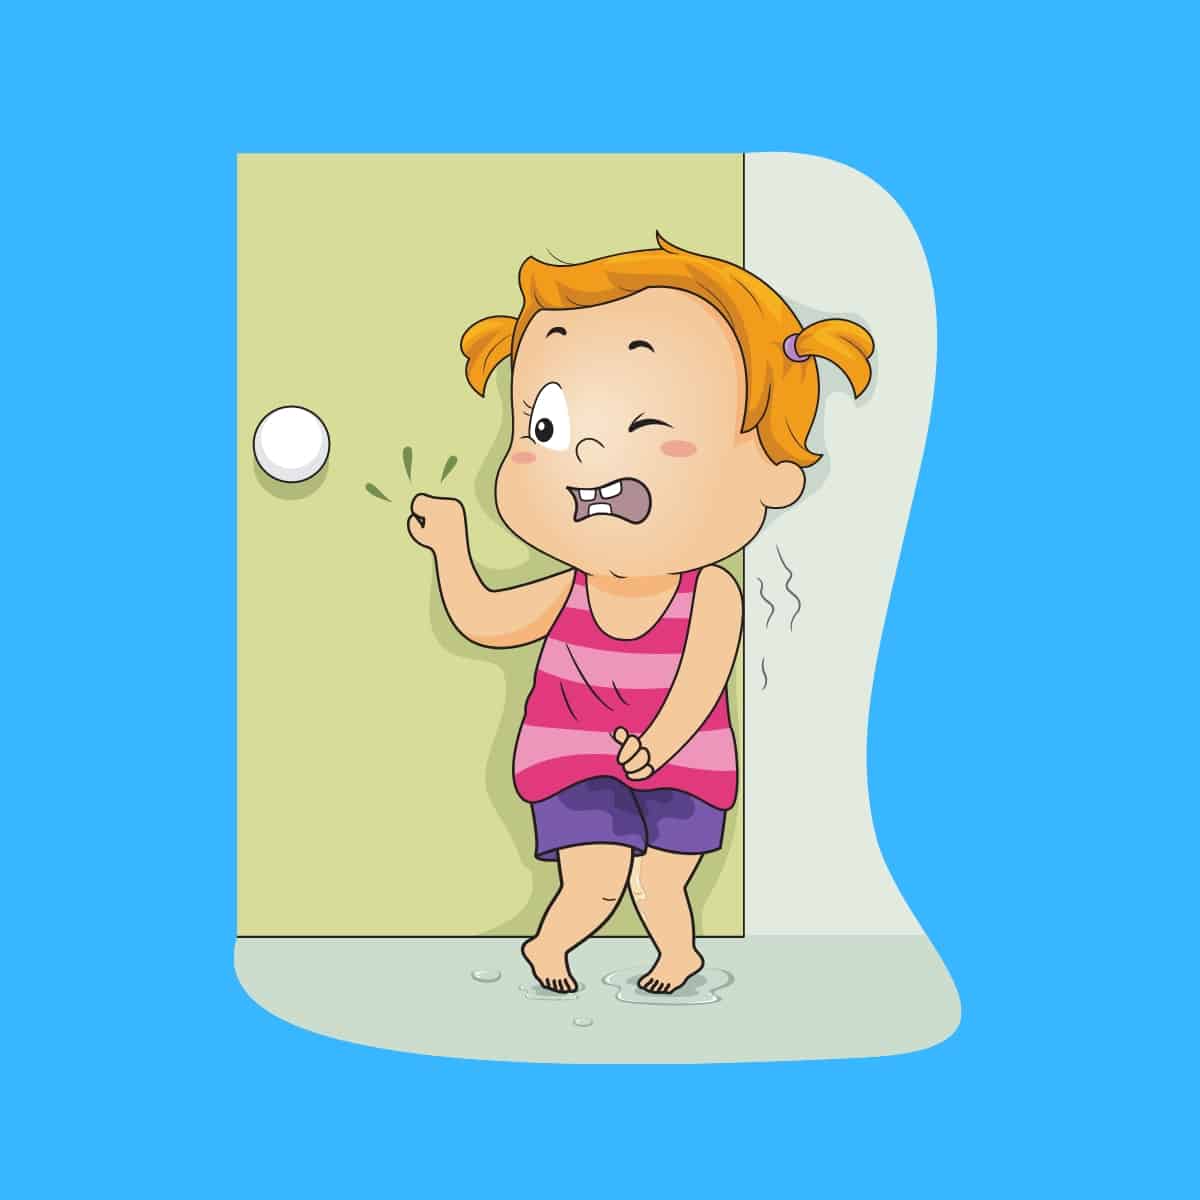 Cartoon graphic of a call with wet pants knocking on the door of a bathroom to go pee on a blue background.